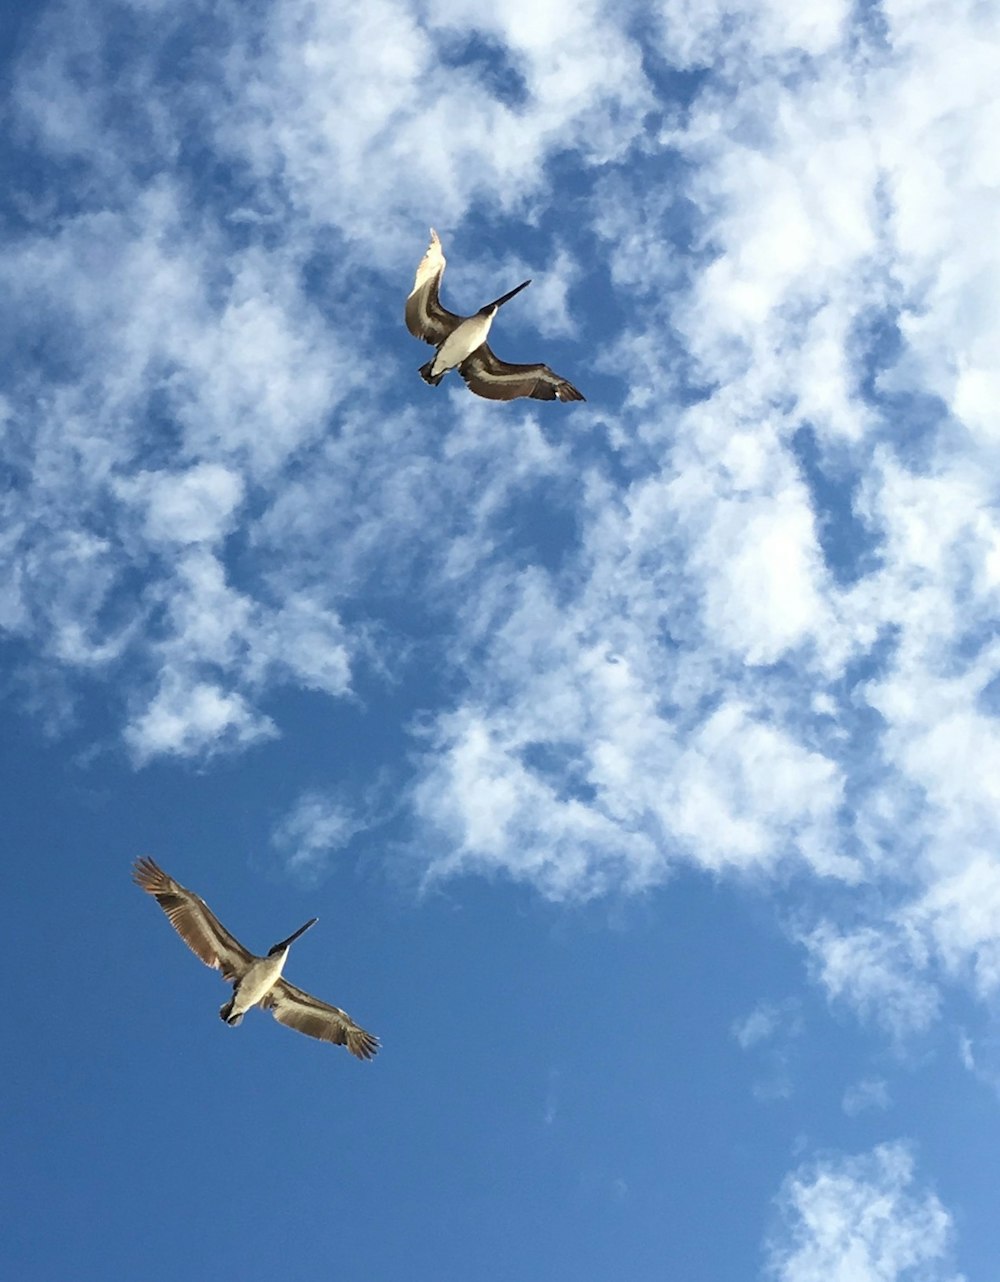 three seagulls flying in a blue sky with white clouds